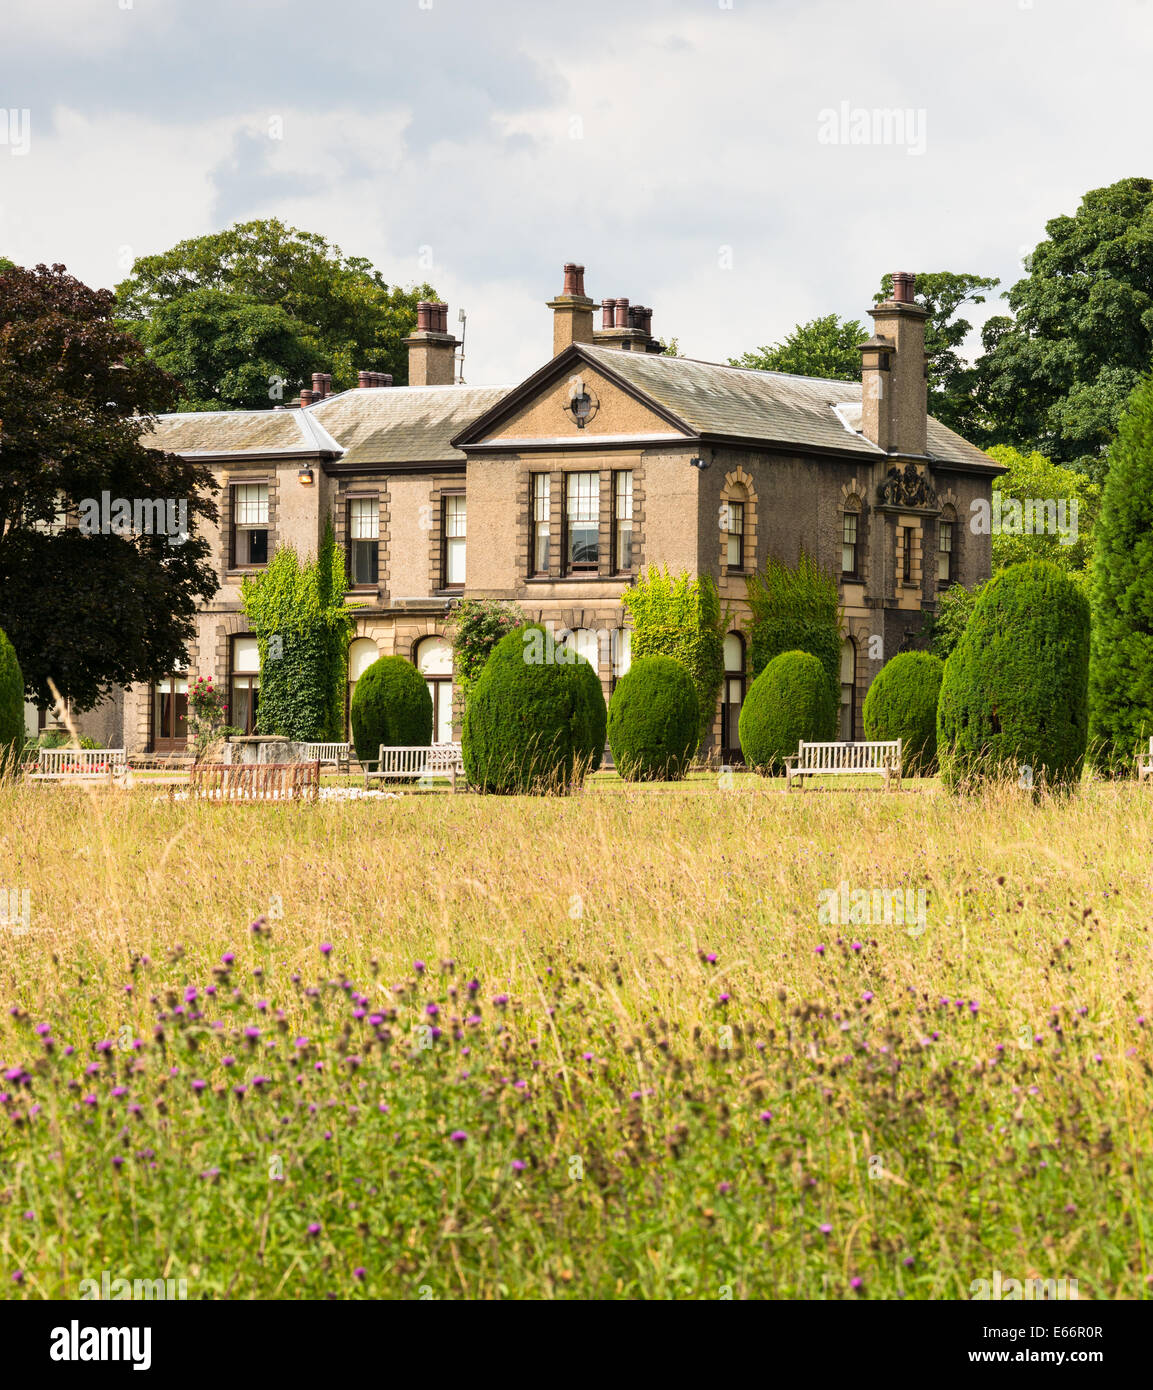 Lotherton Hall, vicino a Leeds, West Yorkshire, Inghilterra, Regno Unito Foto Stock